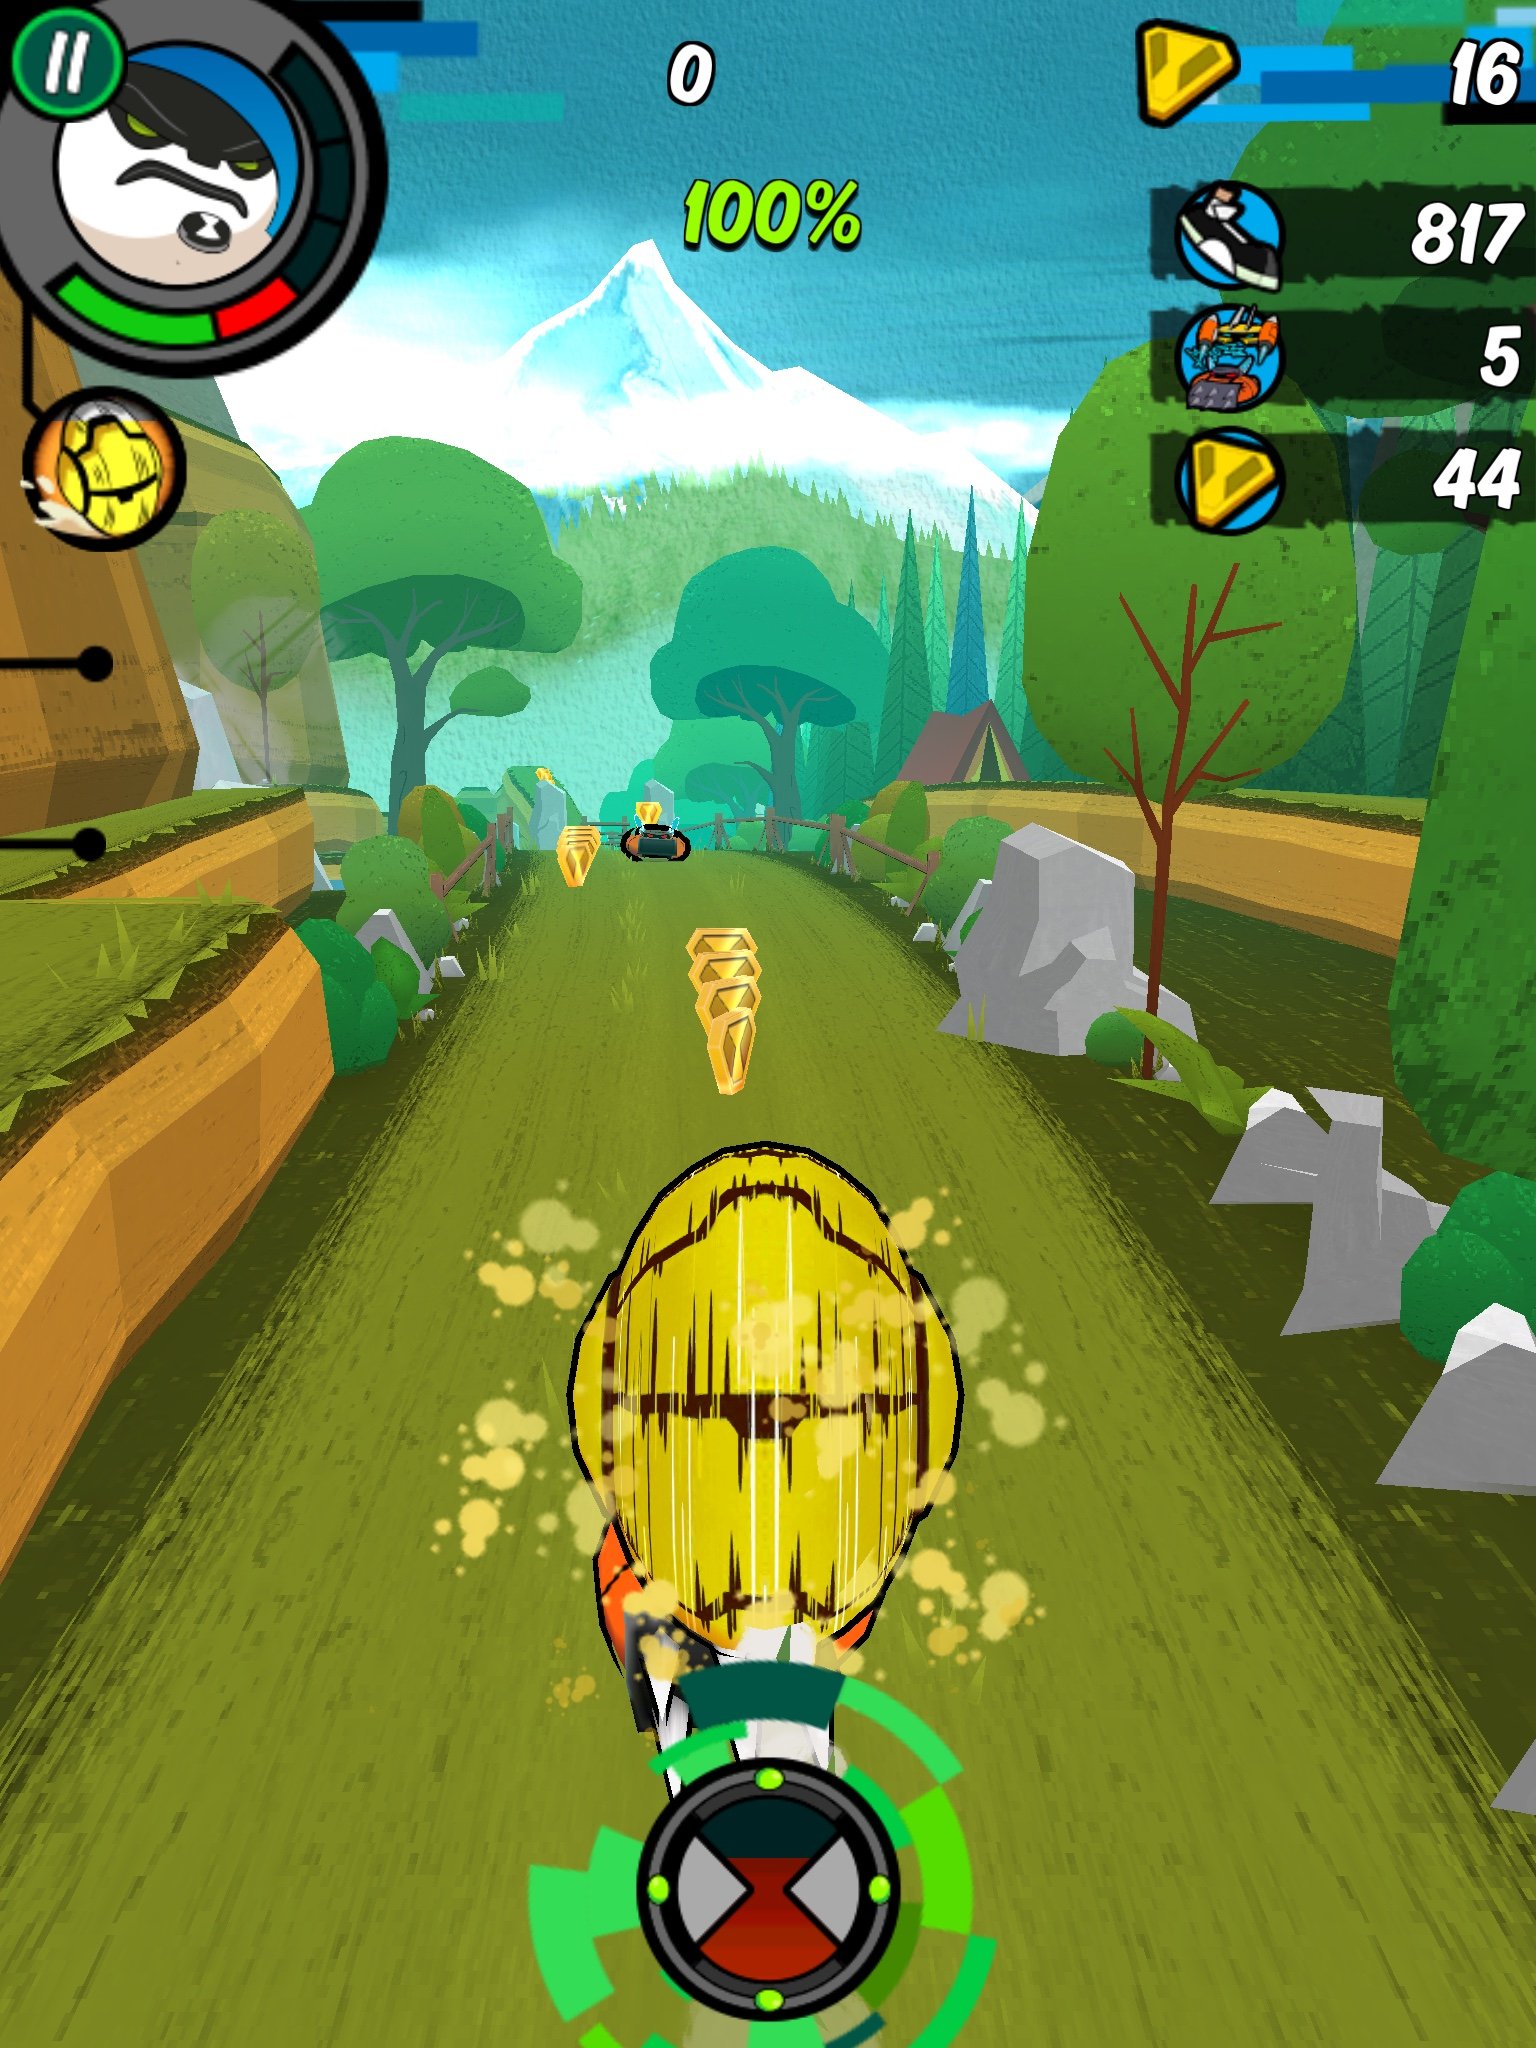 Ben 10: Up to Speed - Cannonball Gameplay